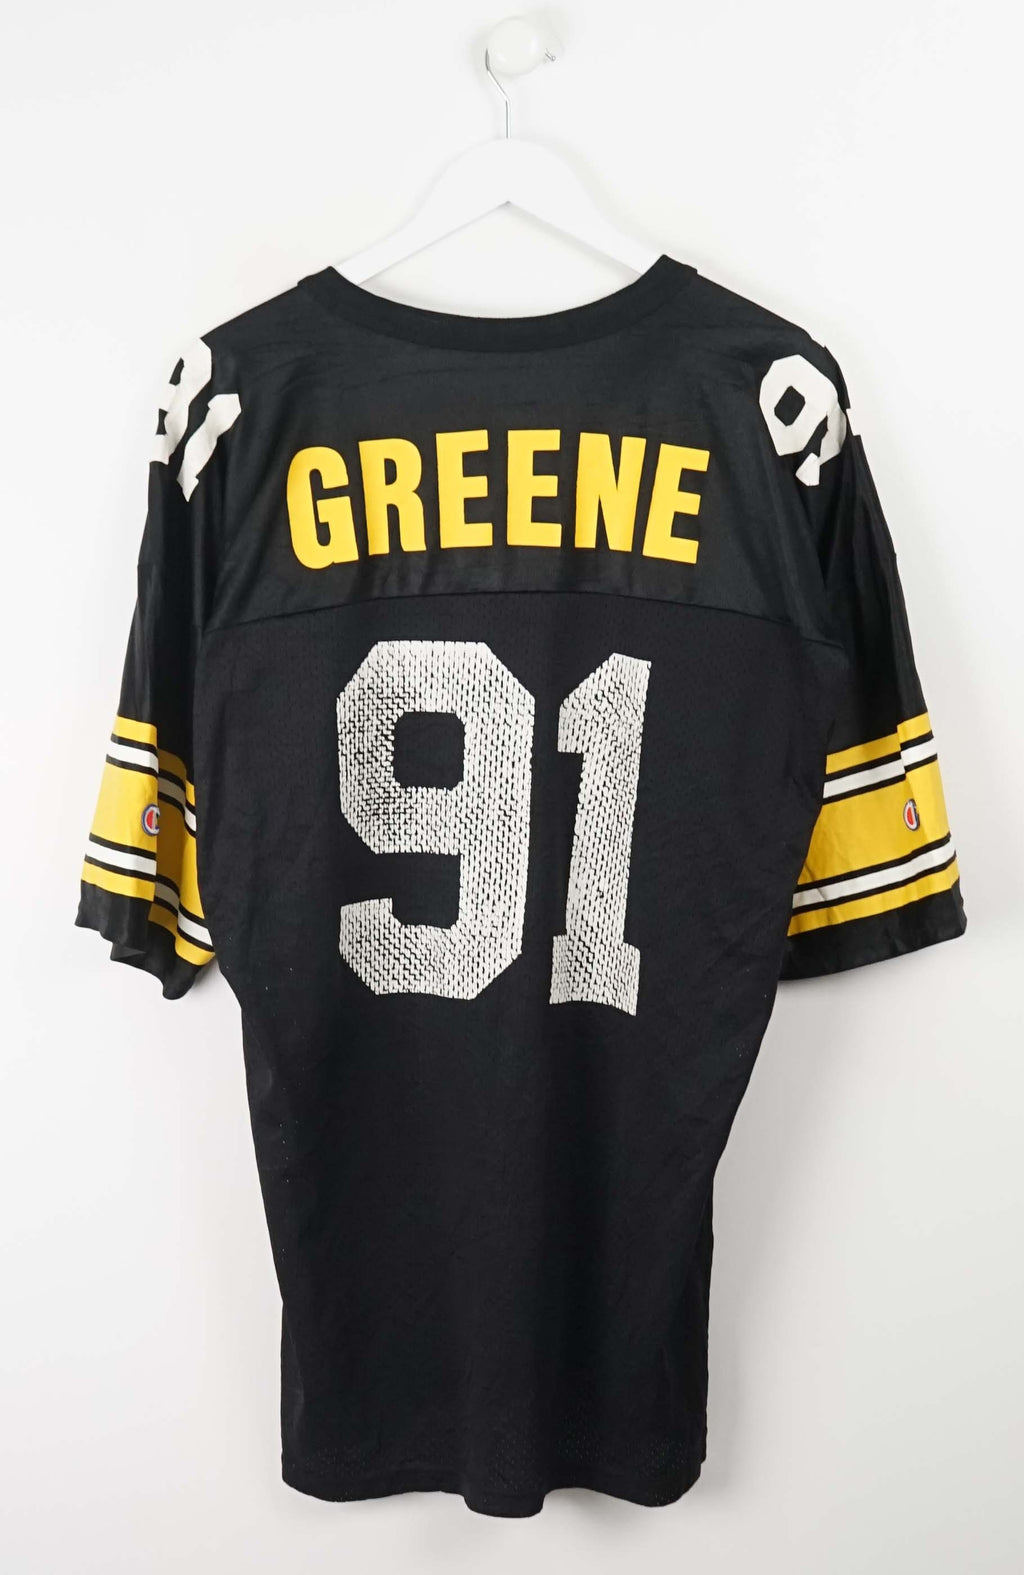 VINTAGE NFL CHAMPION PITTSBURGH STEELERS JERSEY (XL)